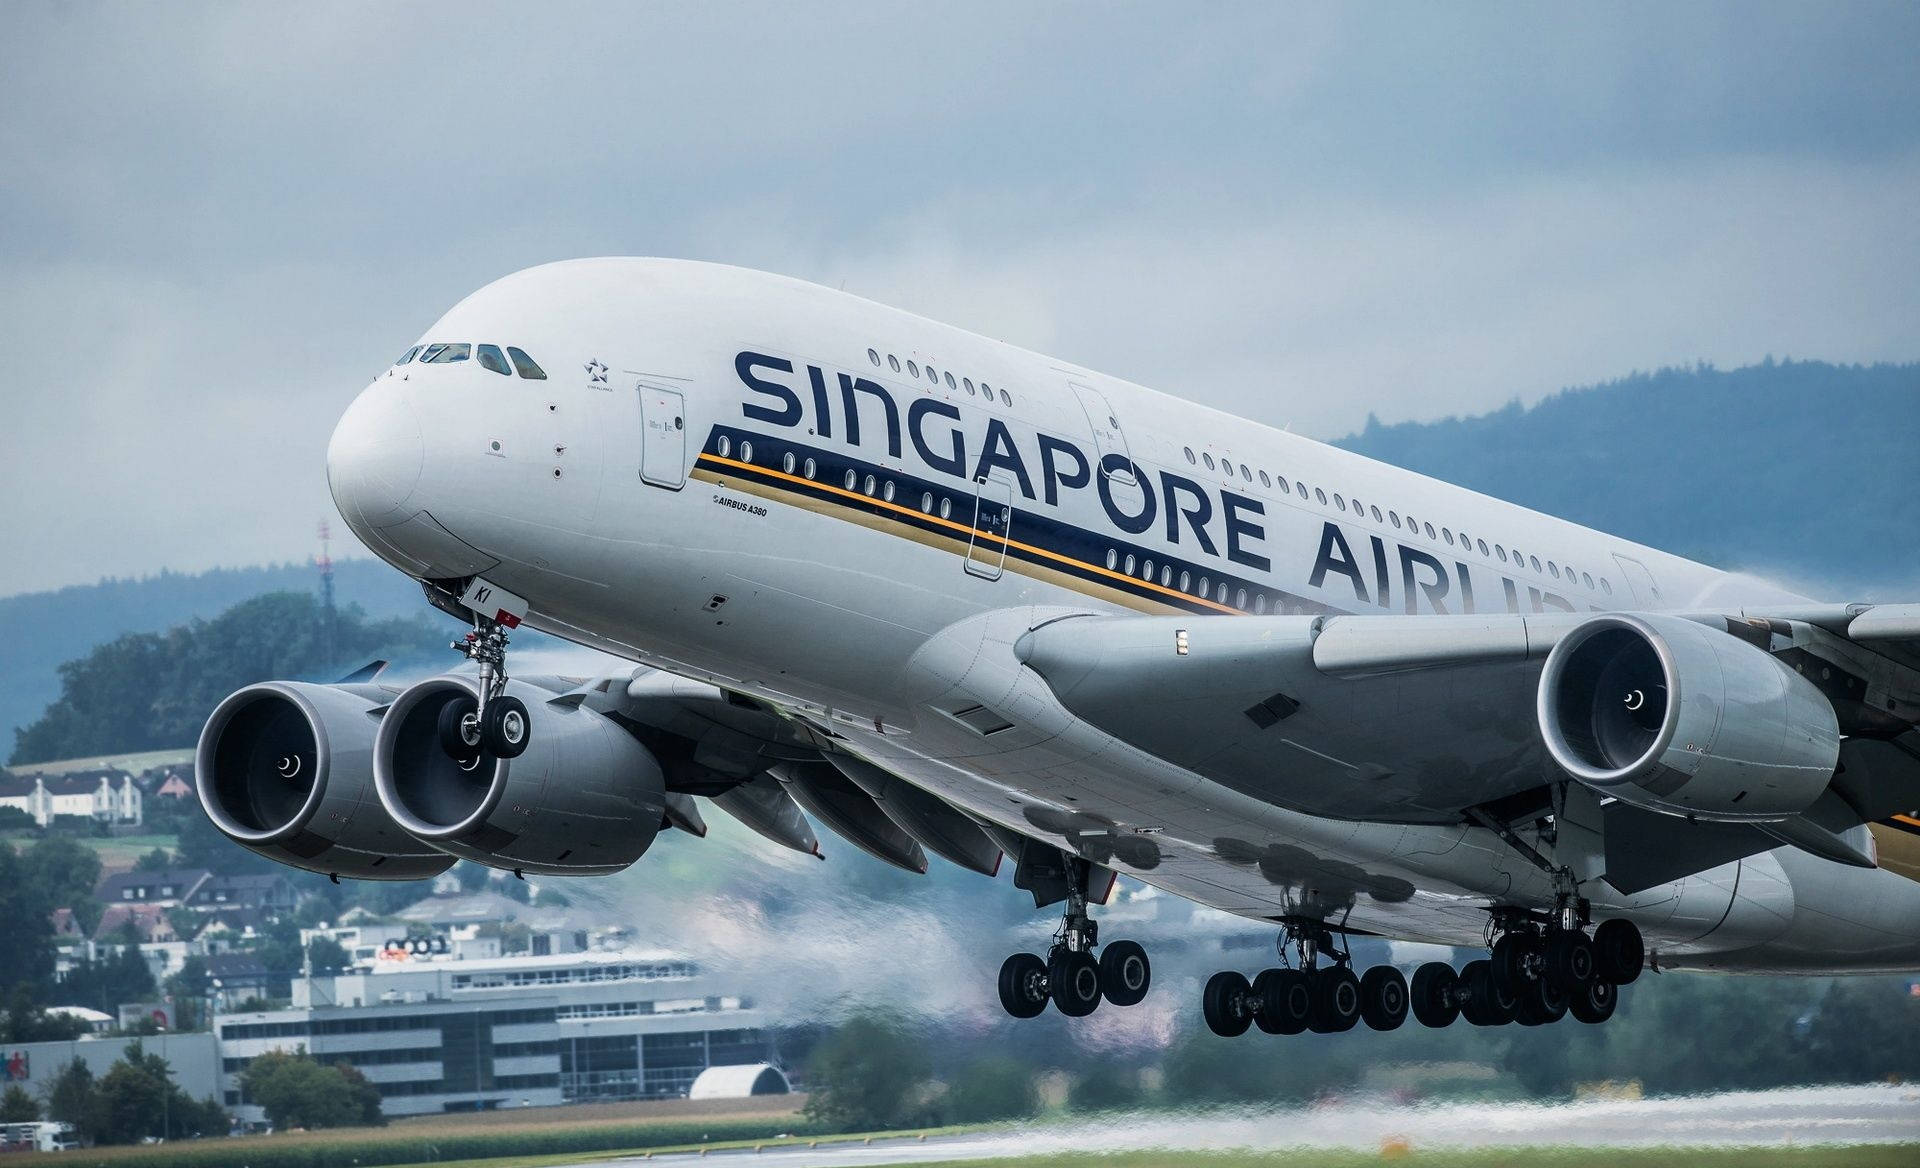 Singapore Airlines Tag Afsted Wallpaper